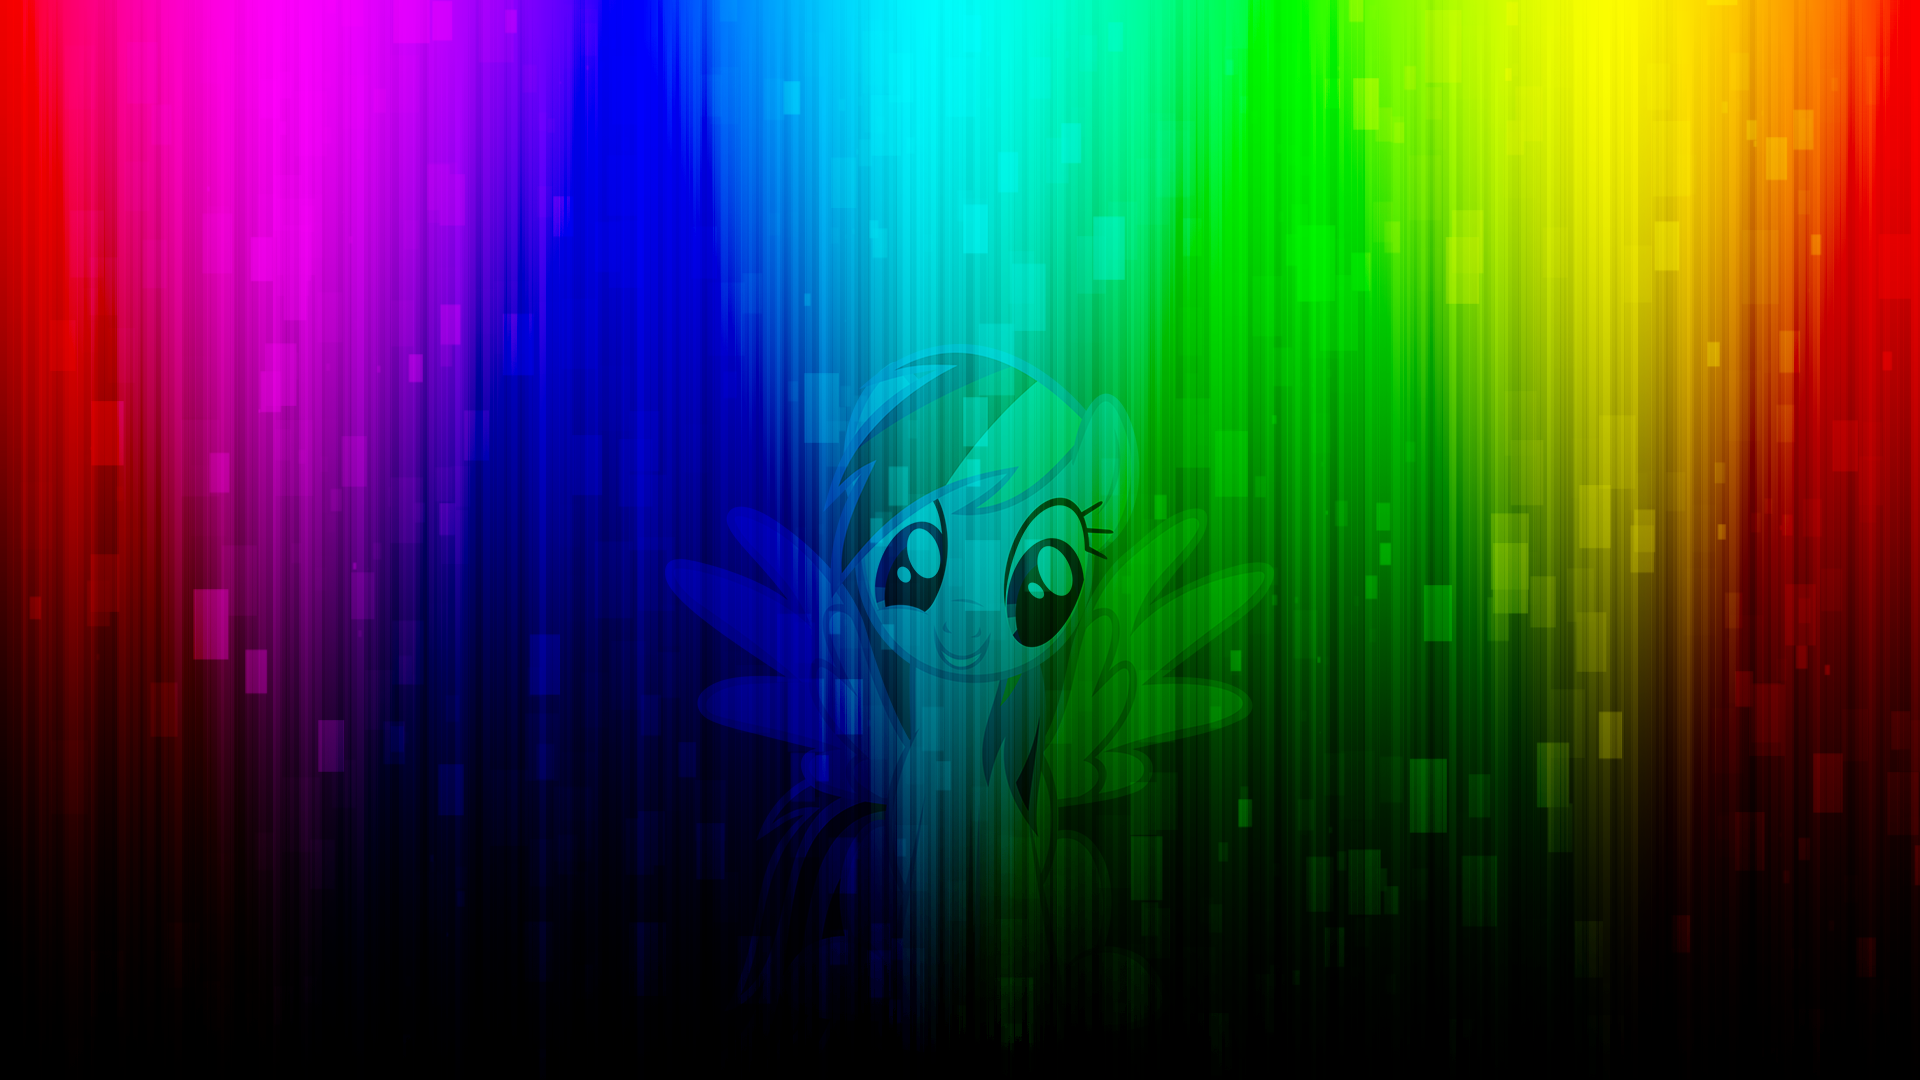 Rainbow Dash Wallpaper by Couth-Kancerous and krazy3